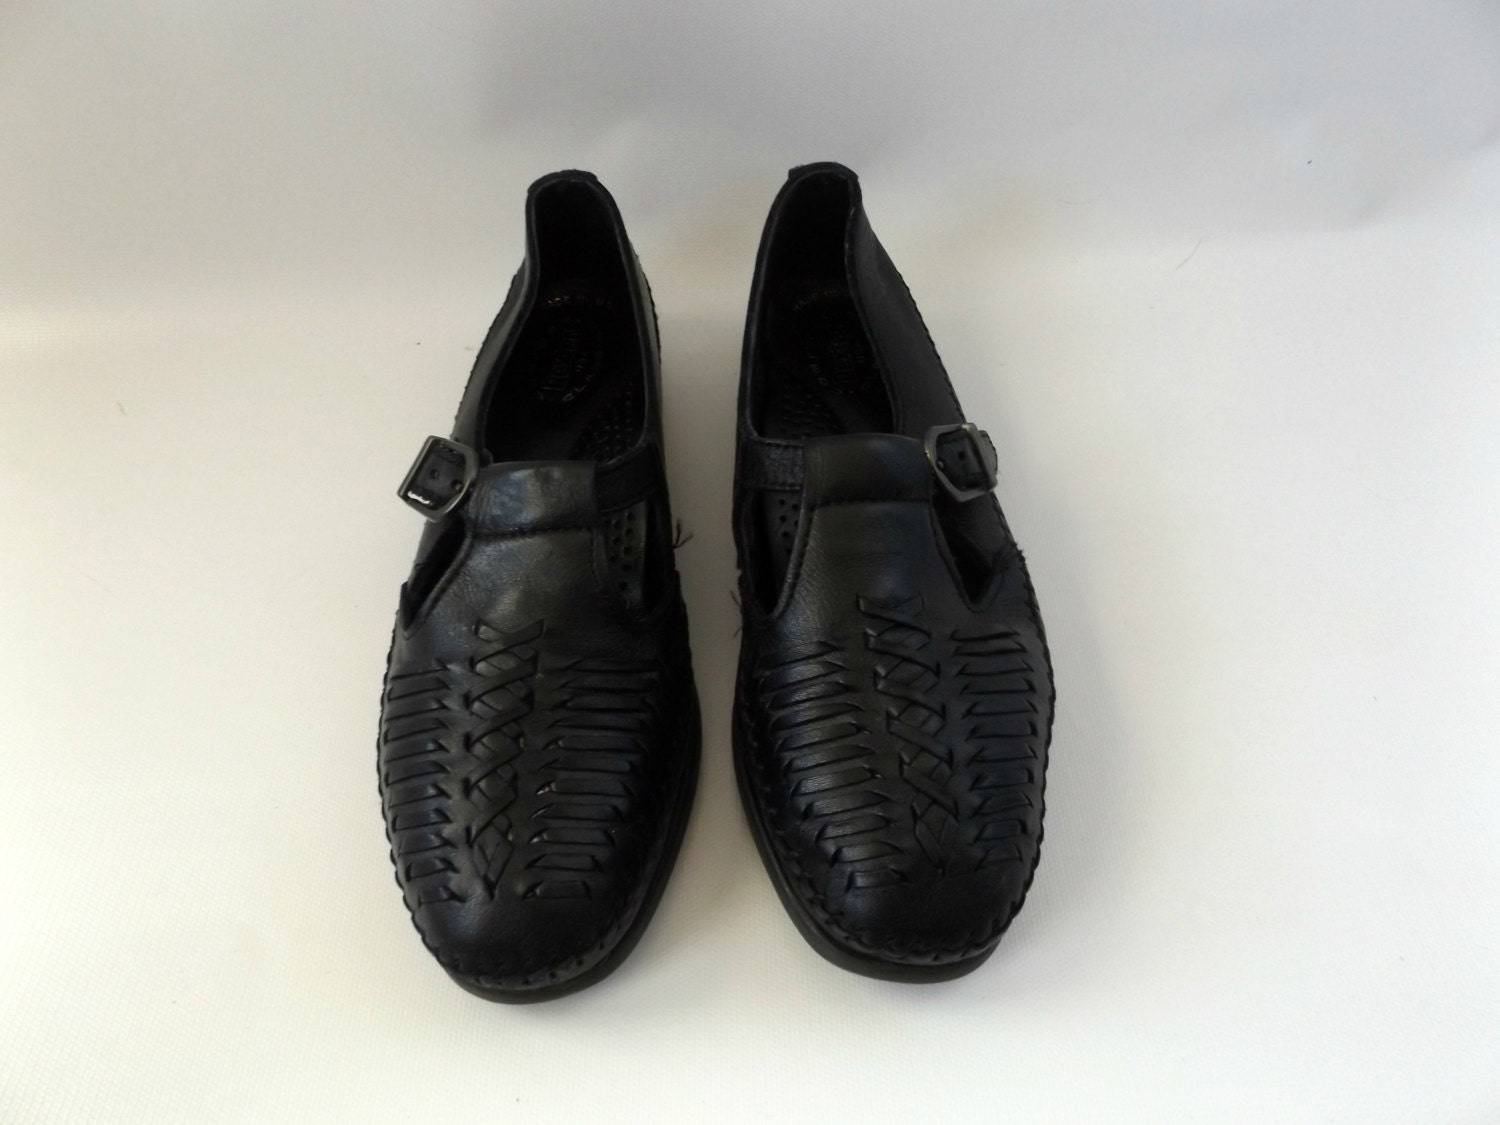 Black Moccasin Mary Jane Shoes Vintage 90s Dexter Woven